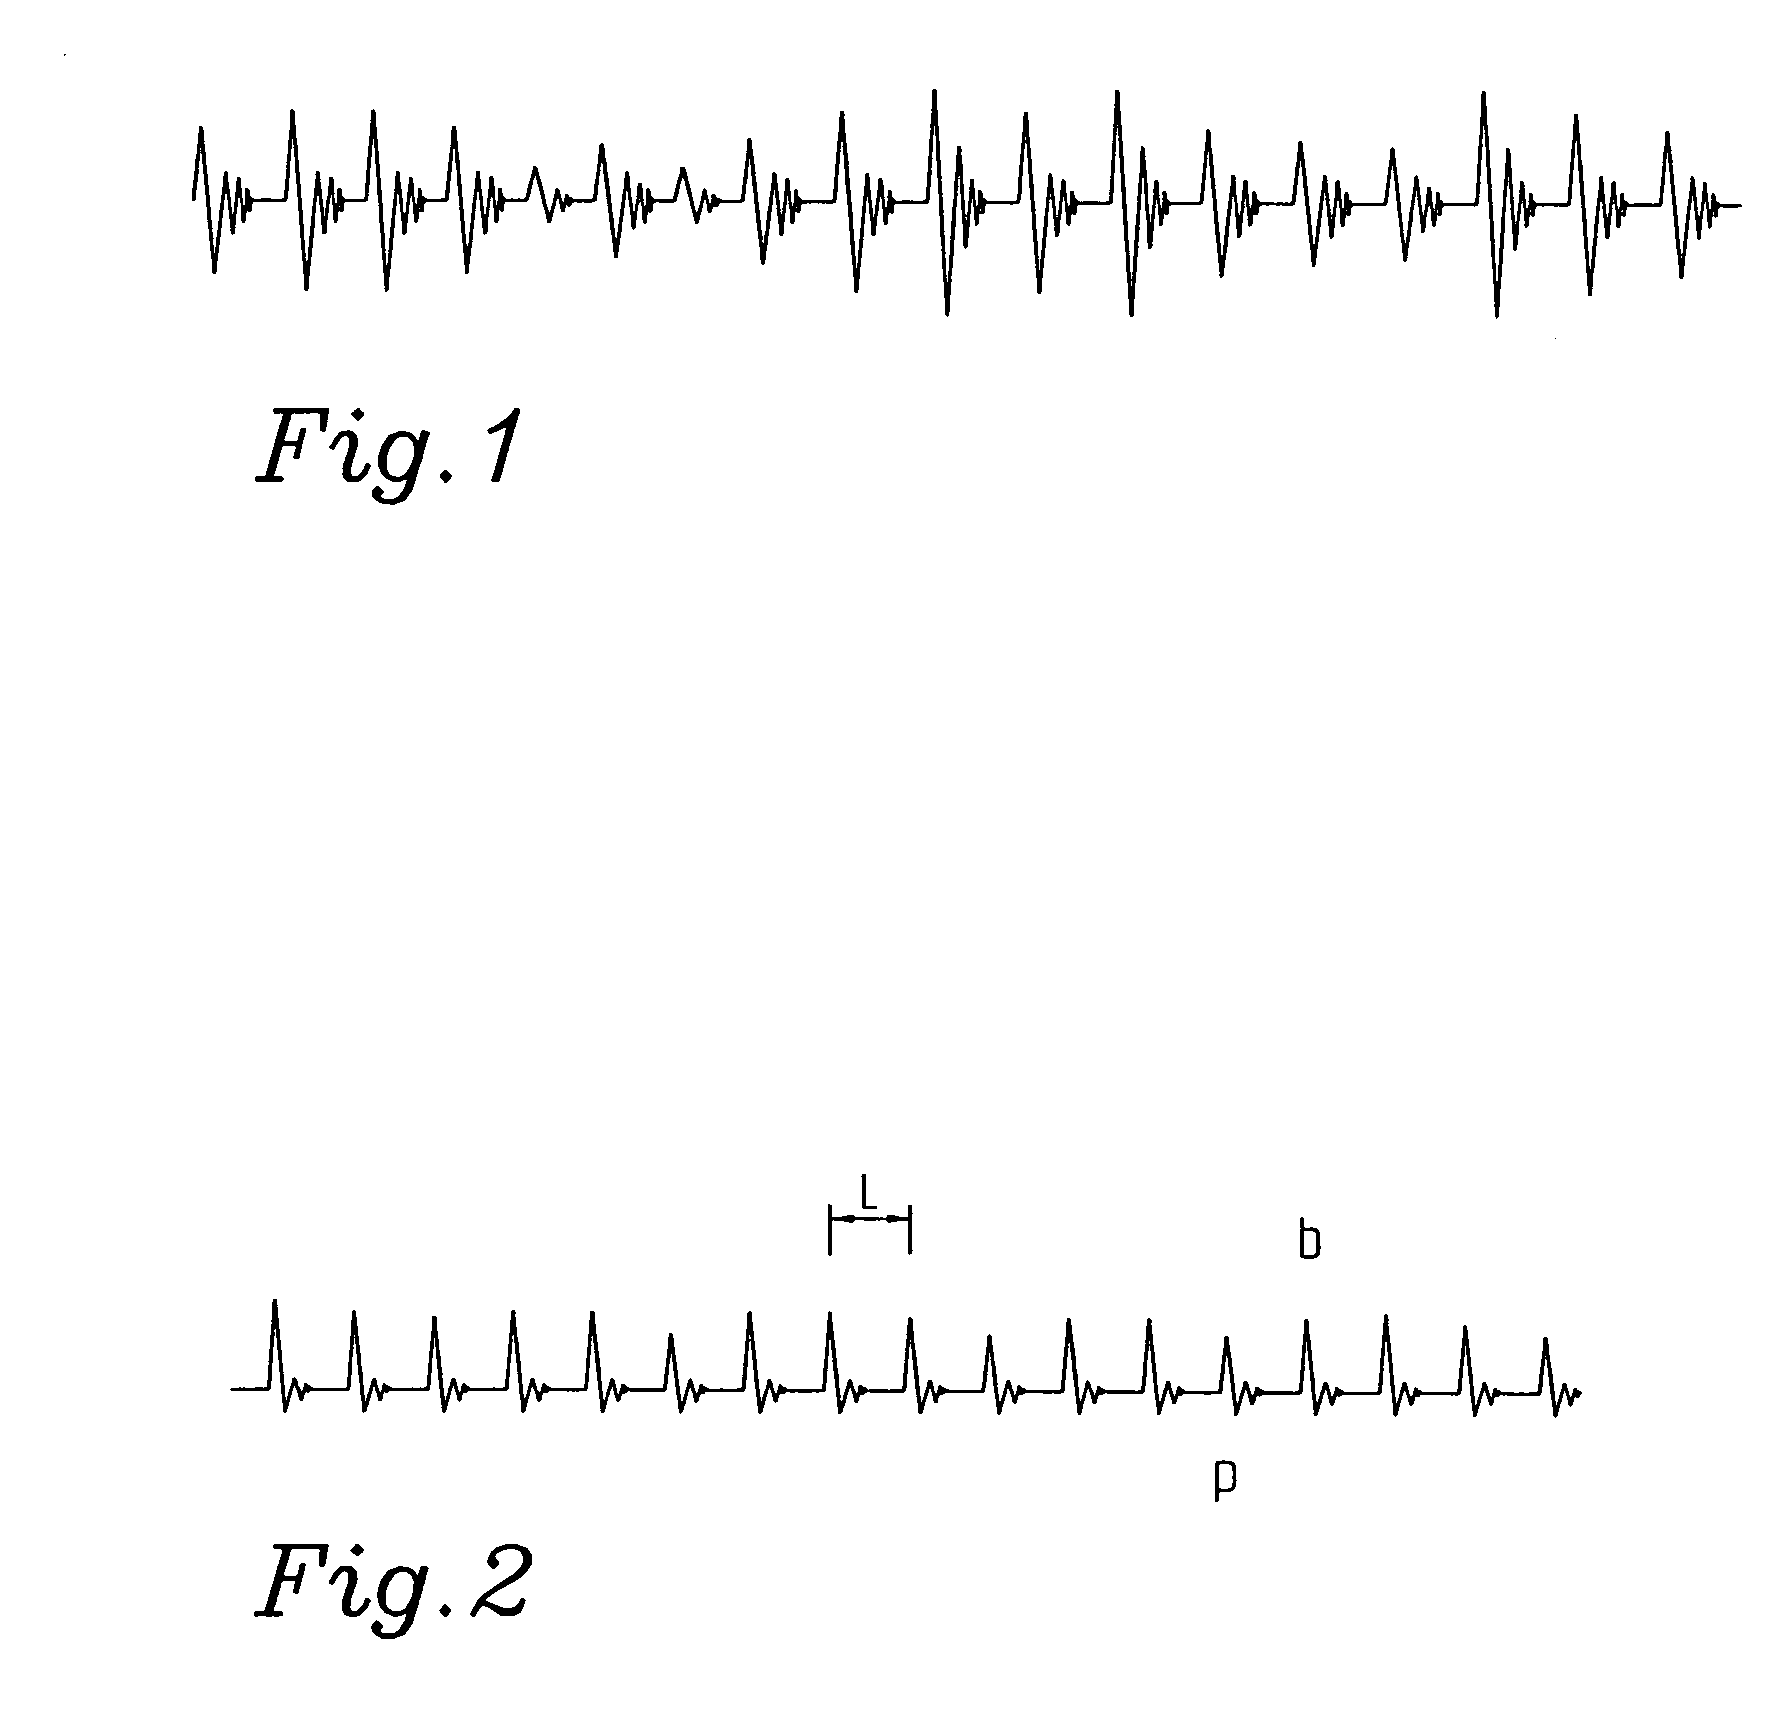 System for handling variations in the reception of a speech signal consisting of packets